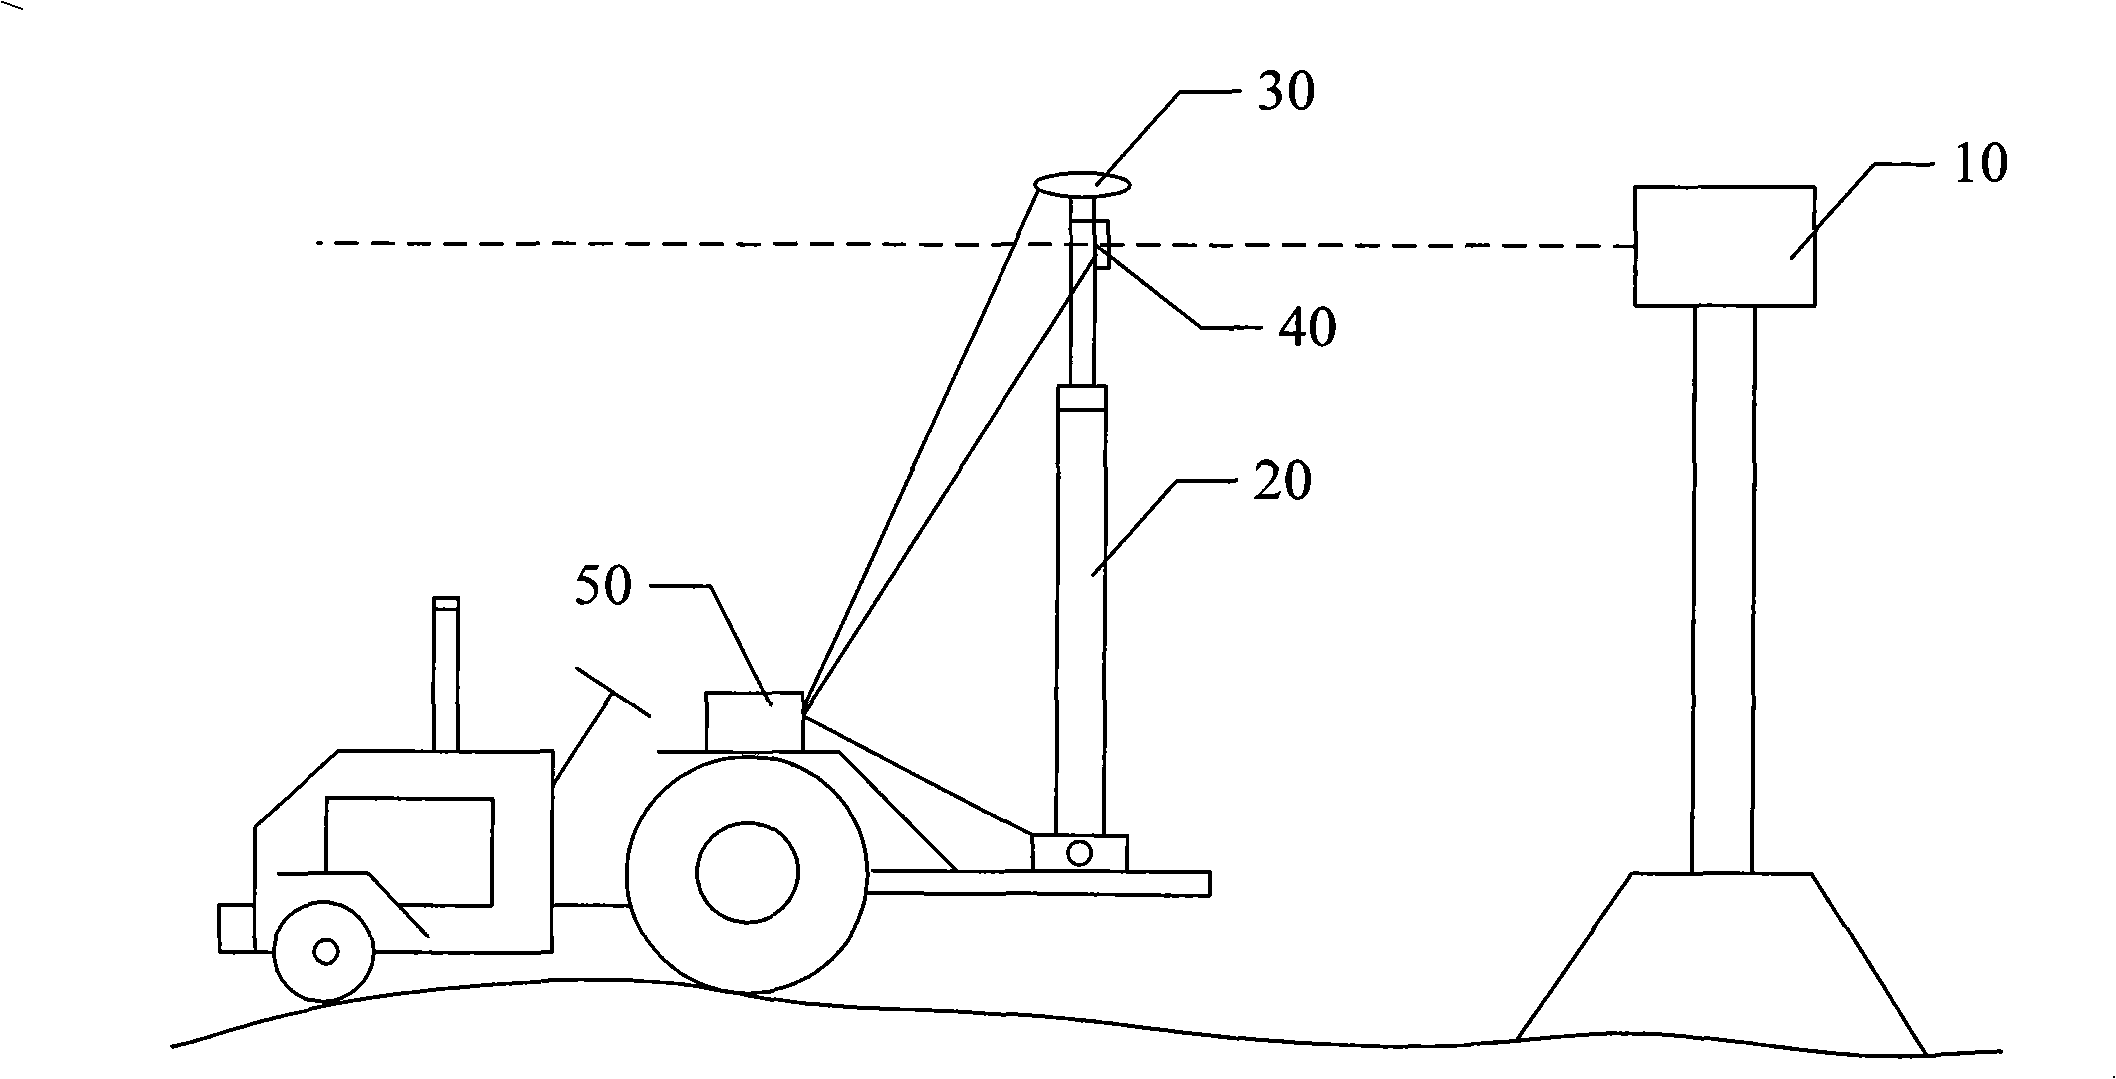 On-board 3D terrain automatic measuring system and method